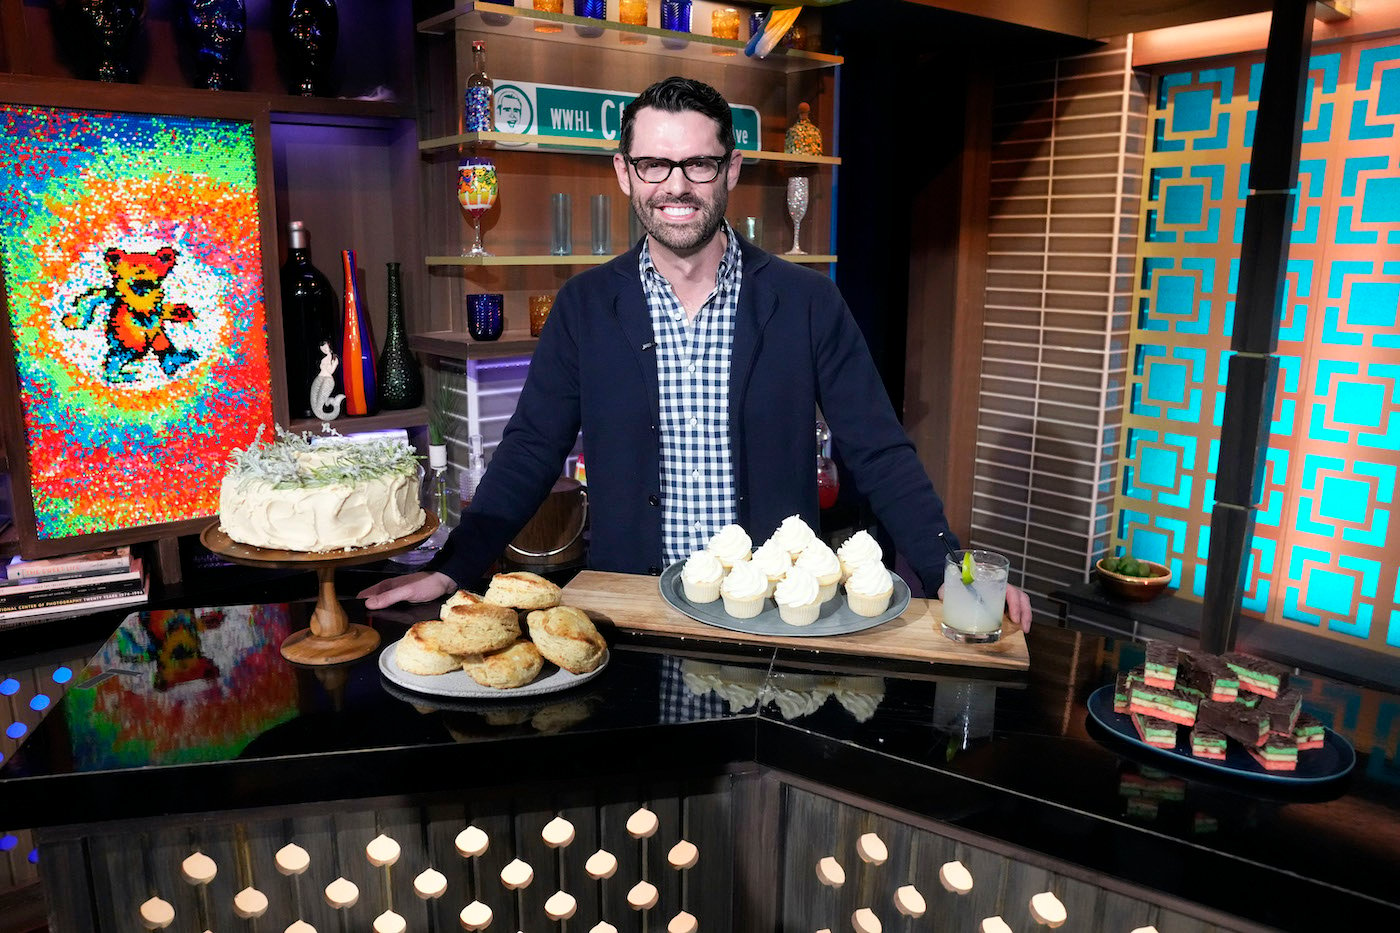 John Kanell from the 'Preppy Kitchen' stands behind the bar at 'WWHL'